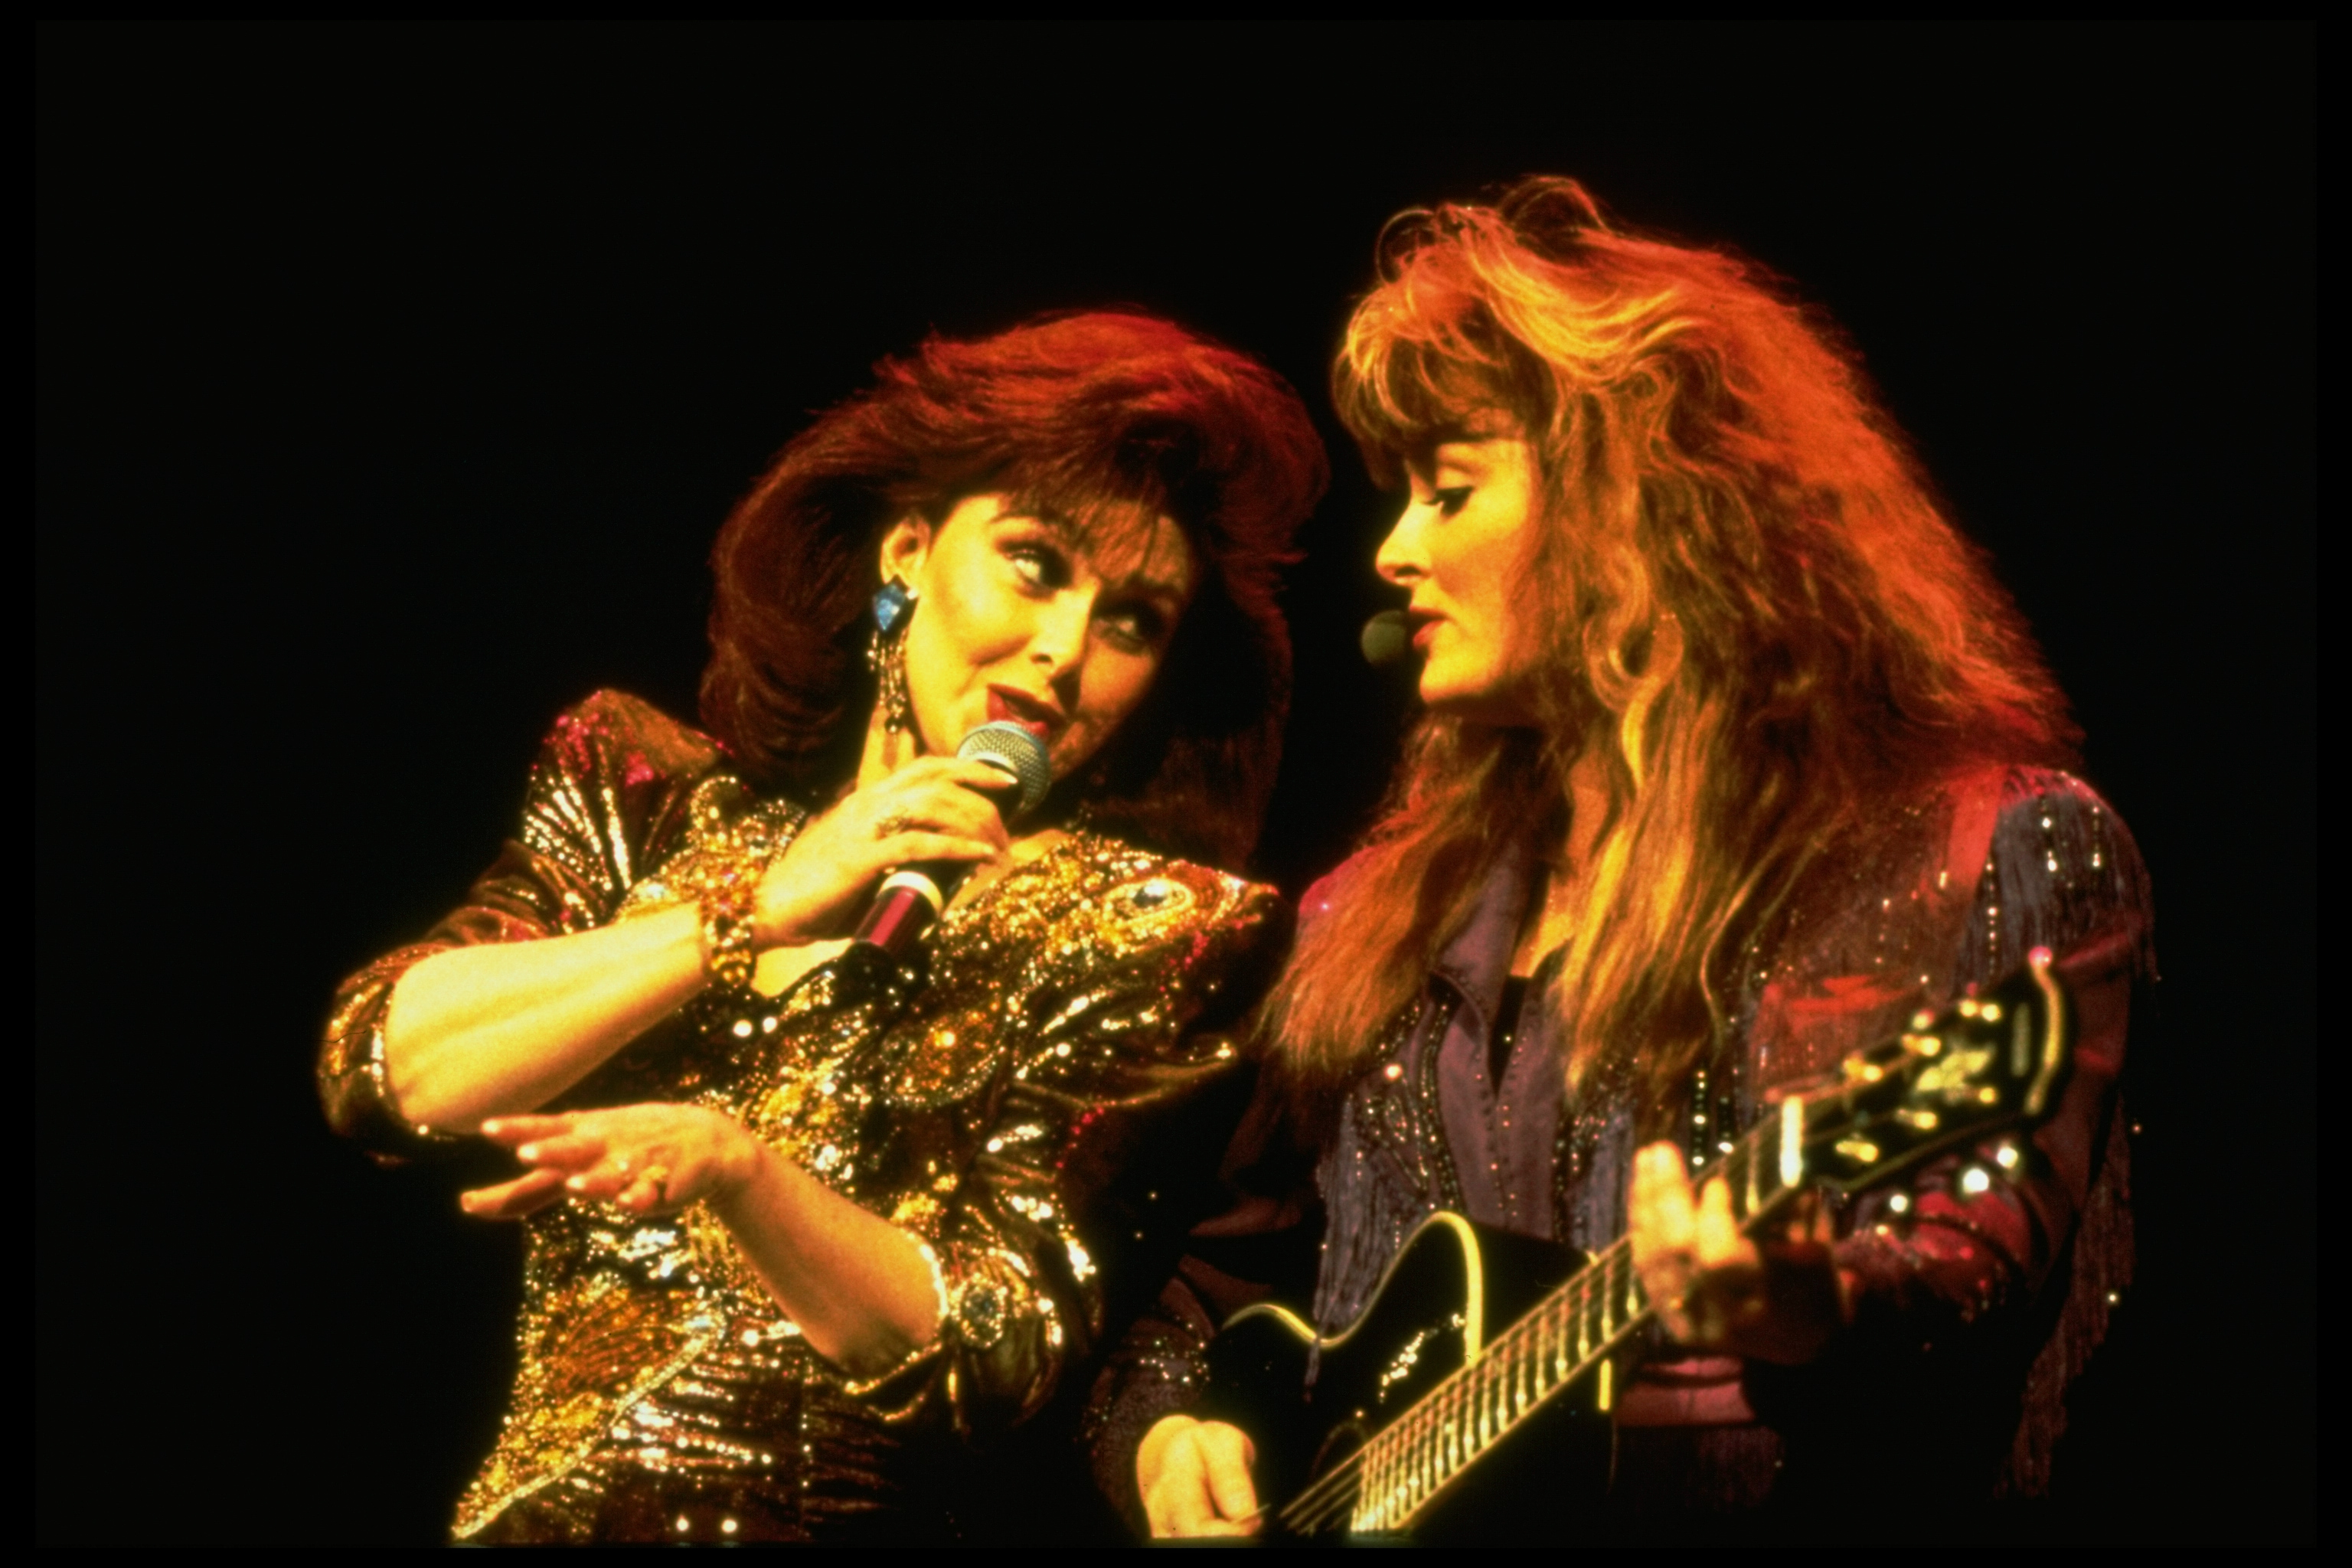 The girl and her mother singing at a concert on January 1, 1990 | Source: Getty Images